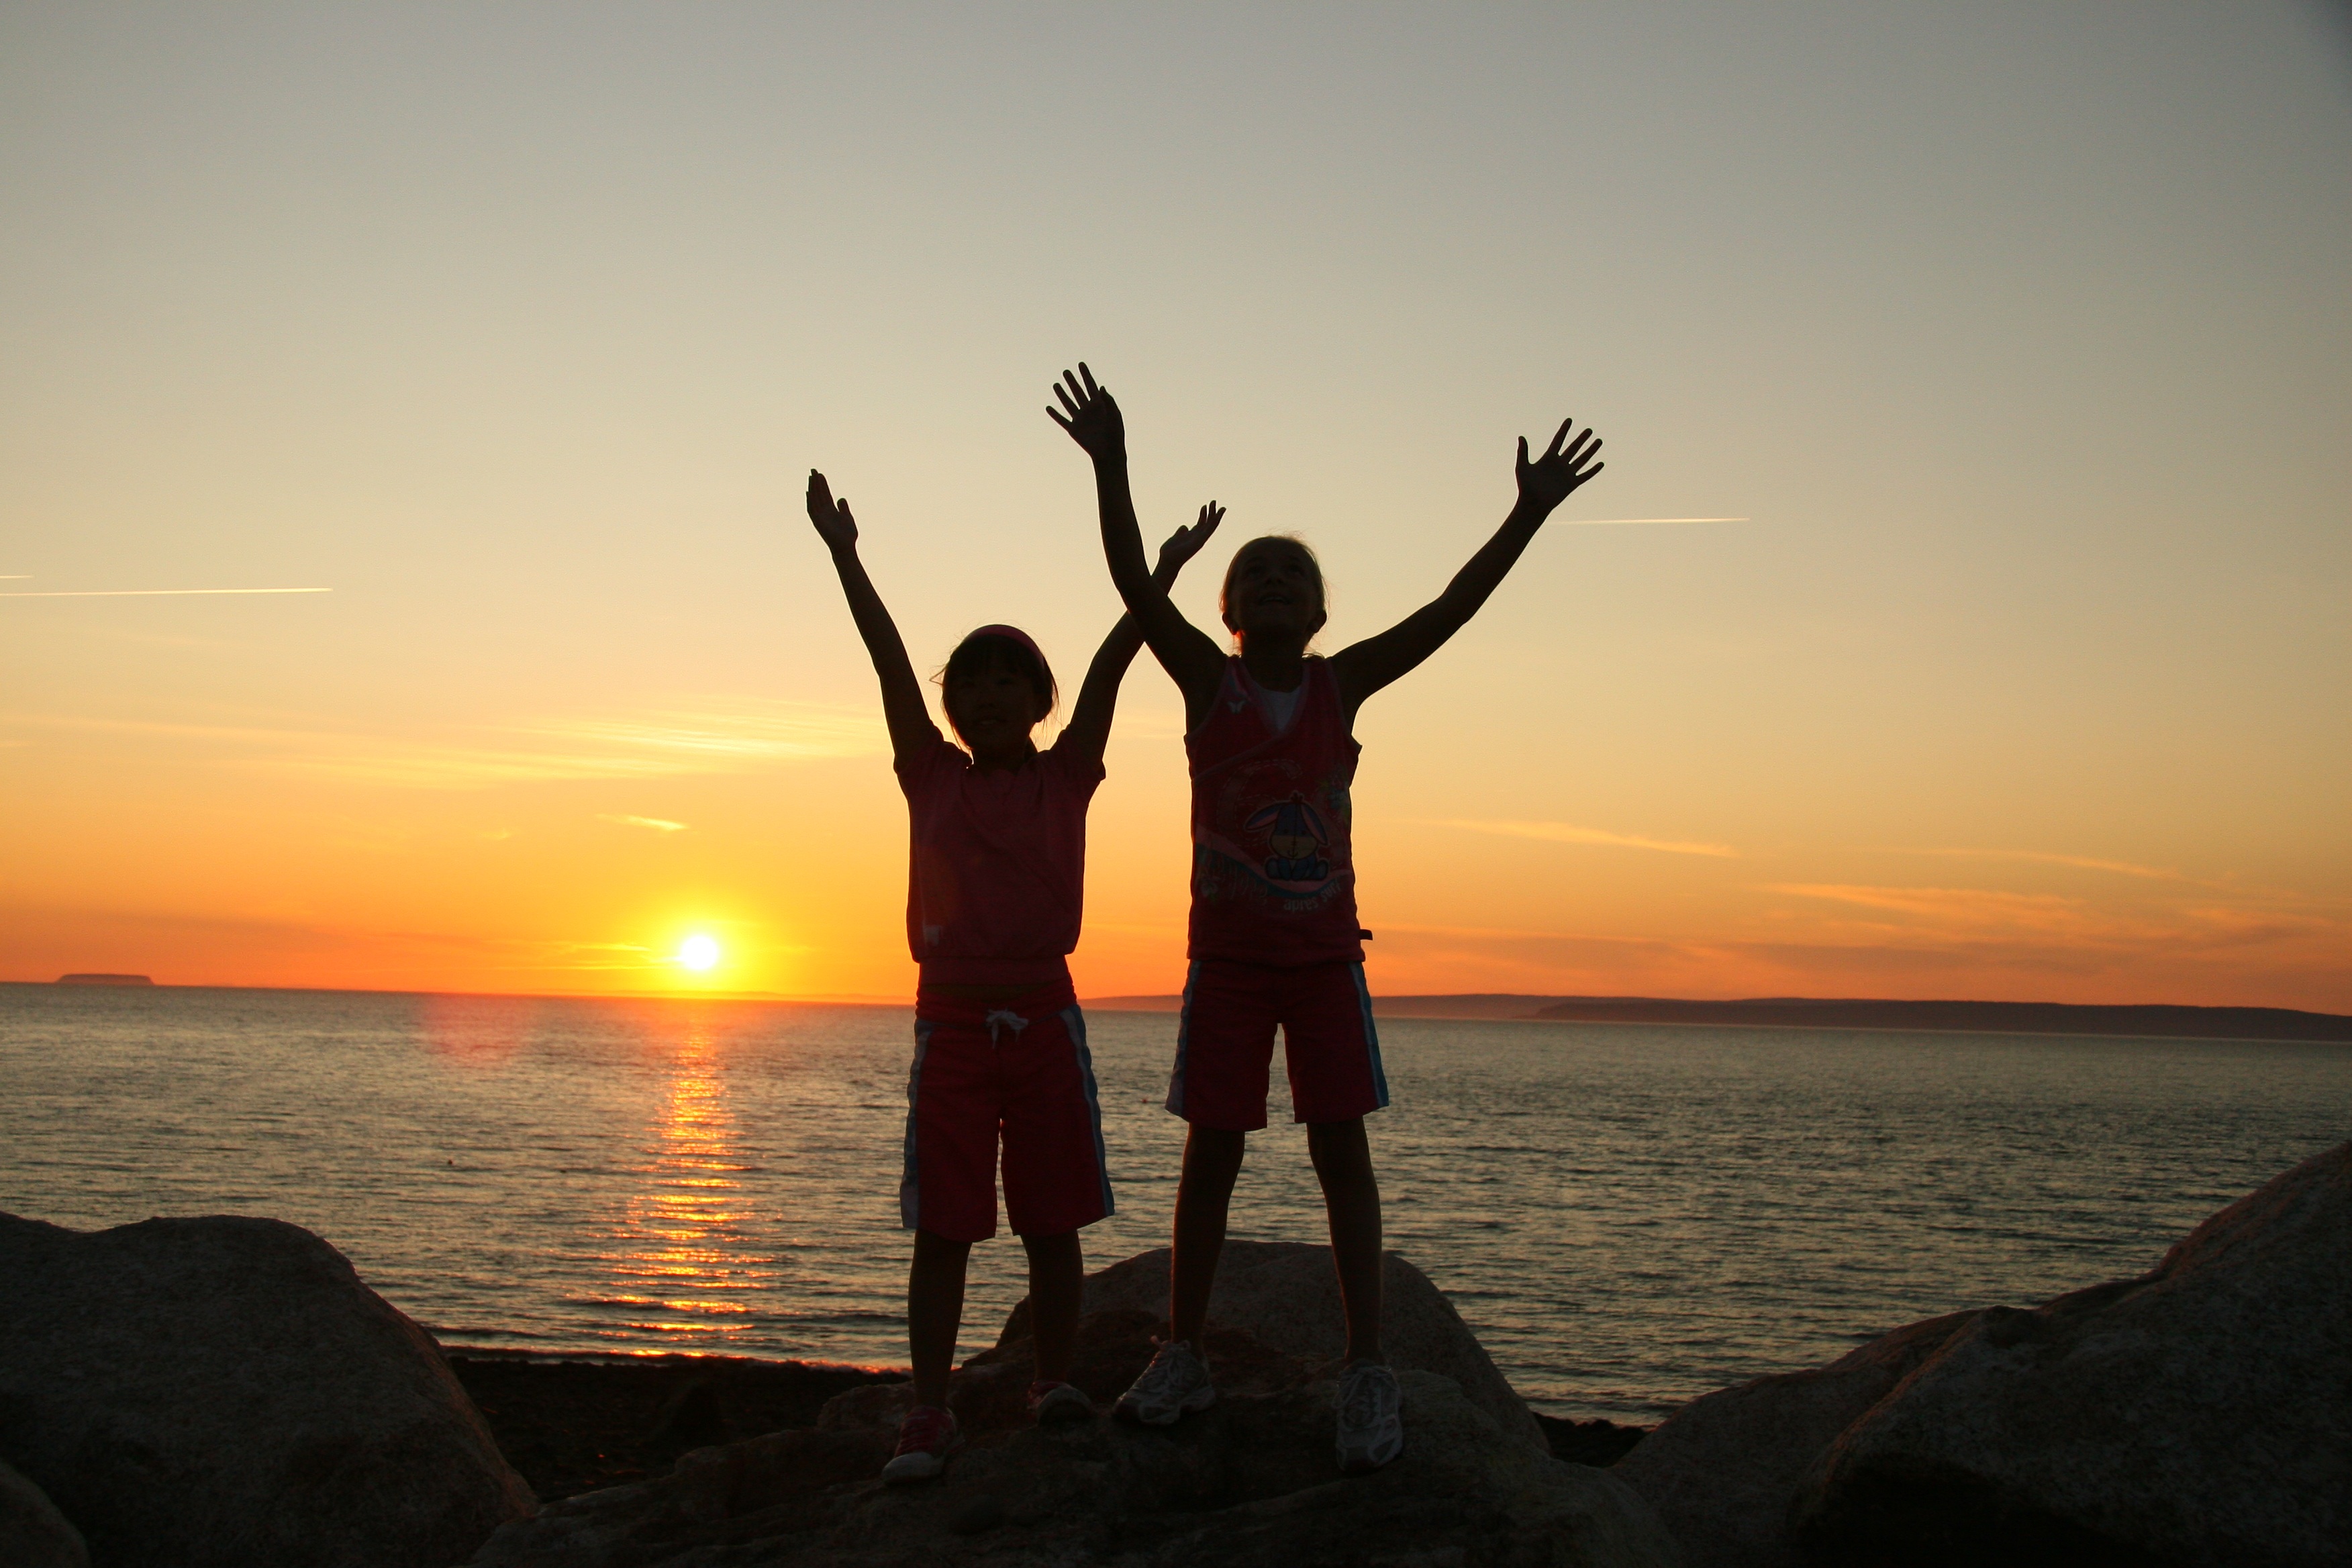 Silhouettes of two children in front of sunset over the ocean